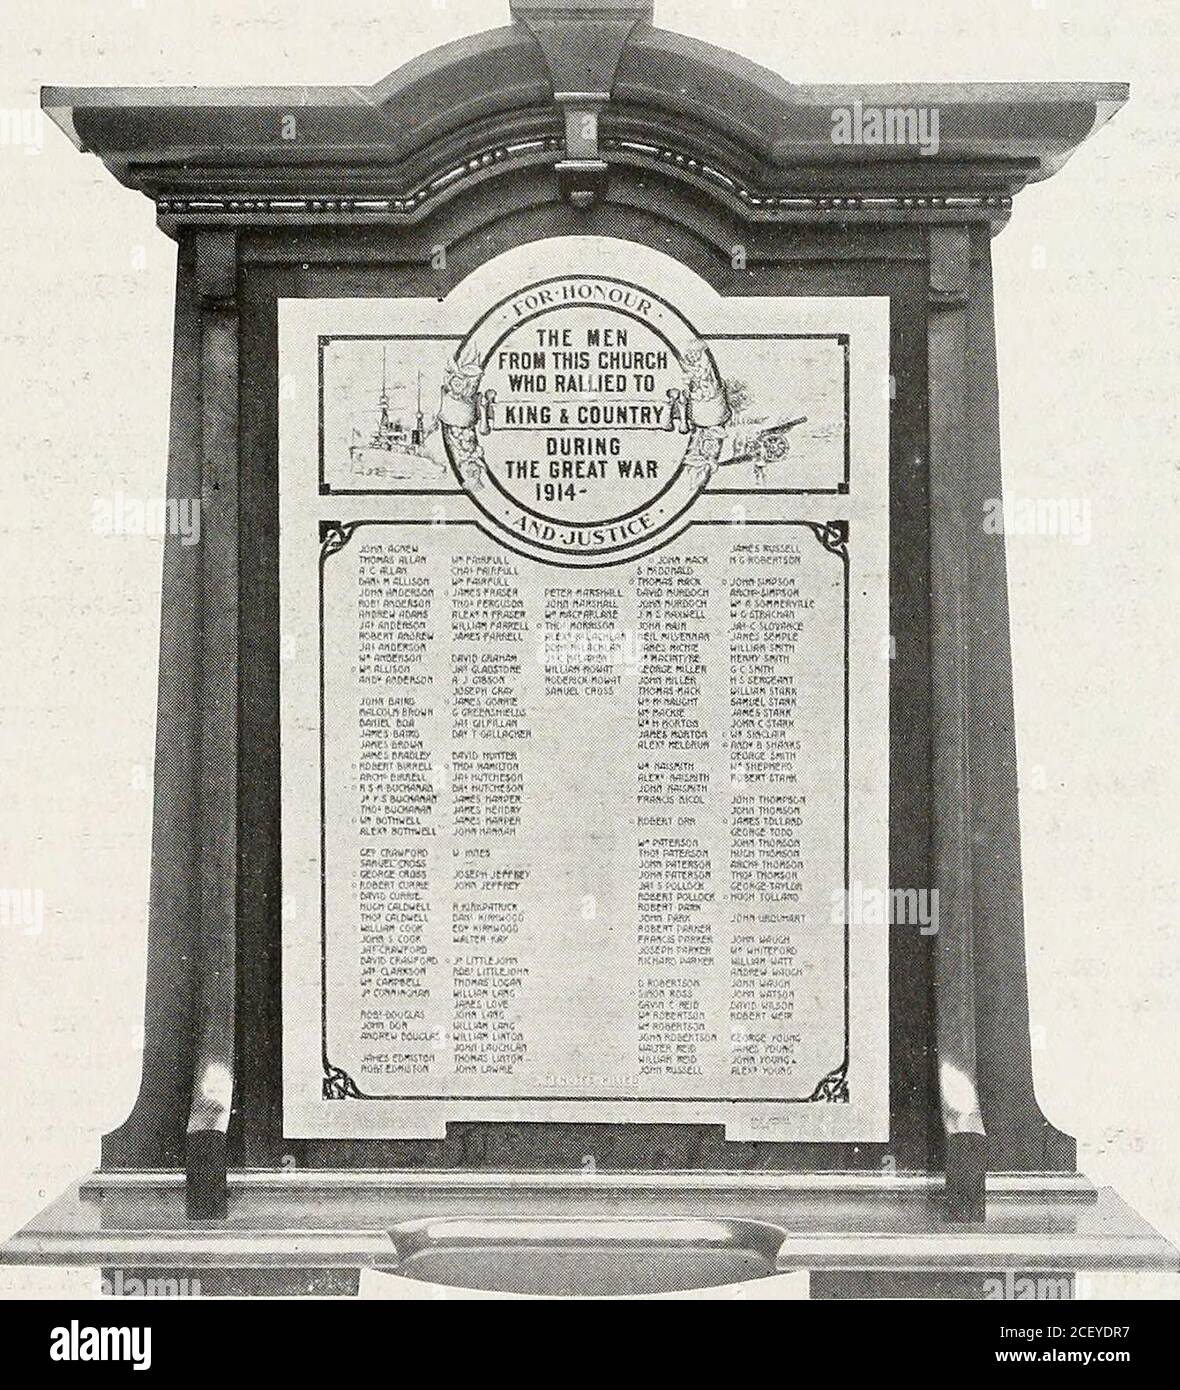 . The Post-Office annual Glasgow directory. EERSCHAUM AND BRIARPIPE MANUFACTURERS. Cohen, Joseph, & Son, 118 Ingramstreet Friedlander, A. & Co., 23Royal Exchange sq MEMORIAL BRASSES. Bryden, John, & Sons, 63 West Regent streetCrawford, John, & Co., 126 Kent roadHamilton, Archd. (brass and bronze memorial tablets and rolls of honour), 70 Glassforl streetMetallic Art Co., Ltd. (brass memorial plates), 212 Old Dumbarton roadMetograph Engineering Co., Ltd. (war memorials a speciality), 8 Grafton st., off Cathedral streetMorgan, G. & J. (silver and bronze), 26 Elmbank crescentStewart, J. T. & C. E. Stock Photo